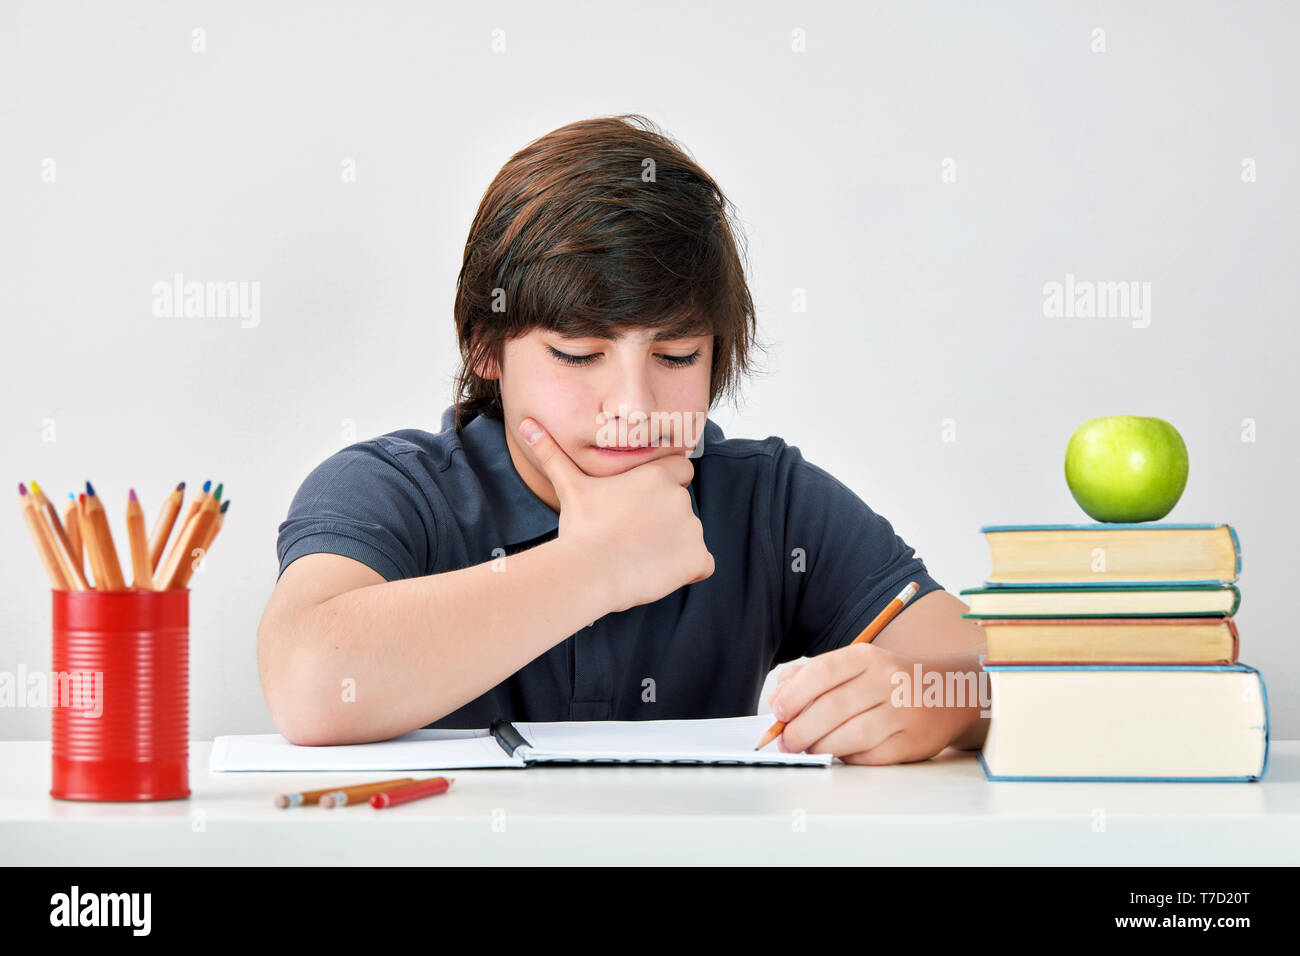 Caucasian school boy sitting at the table and thinking with a serious and concentrated expression while doing his homework. Stock Photo